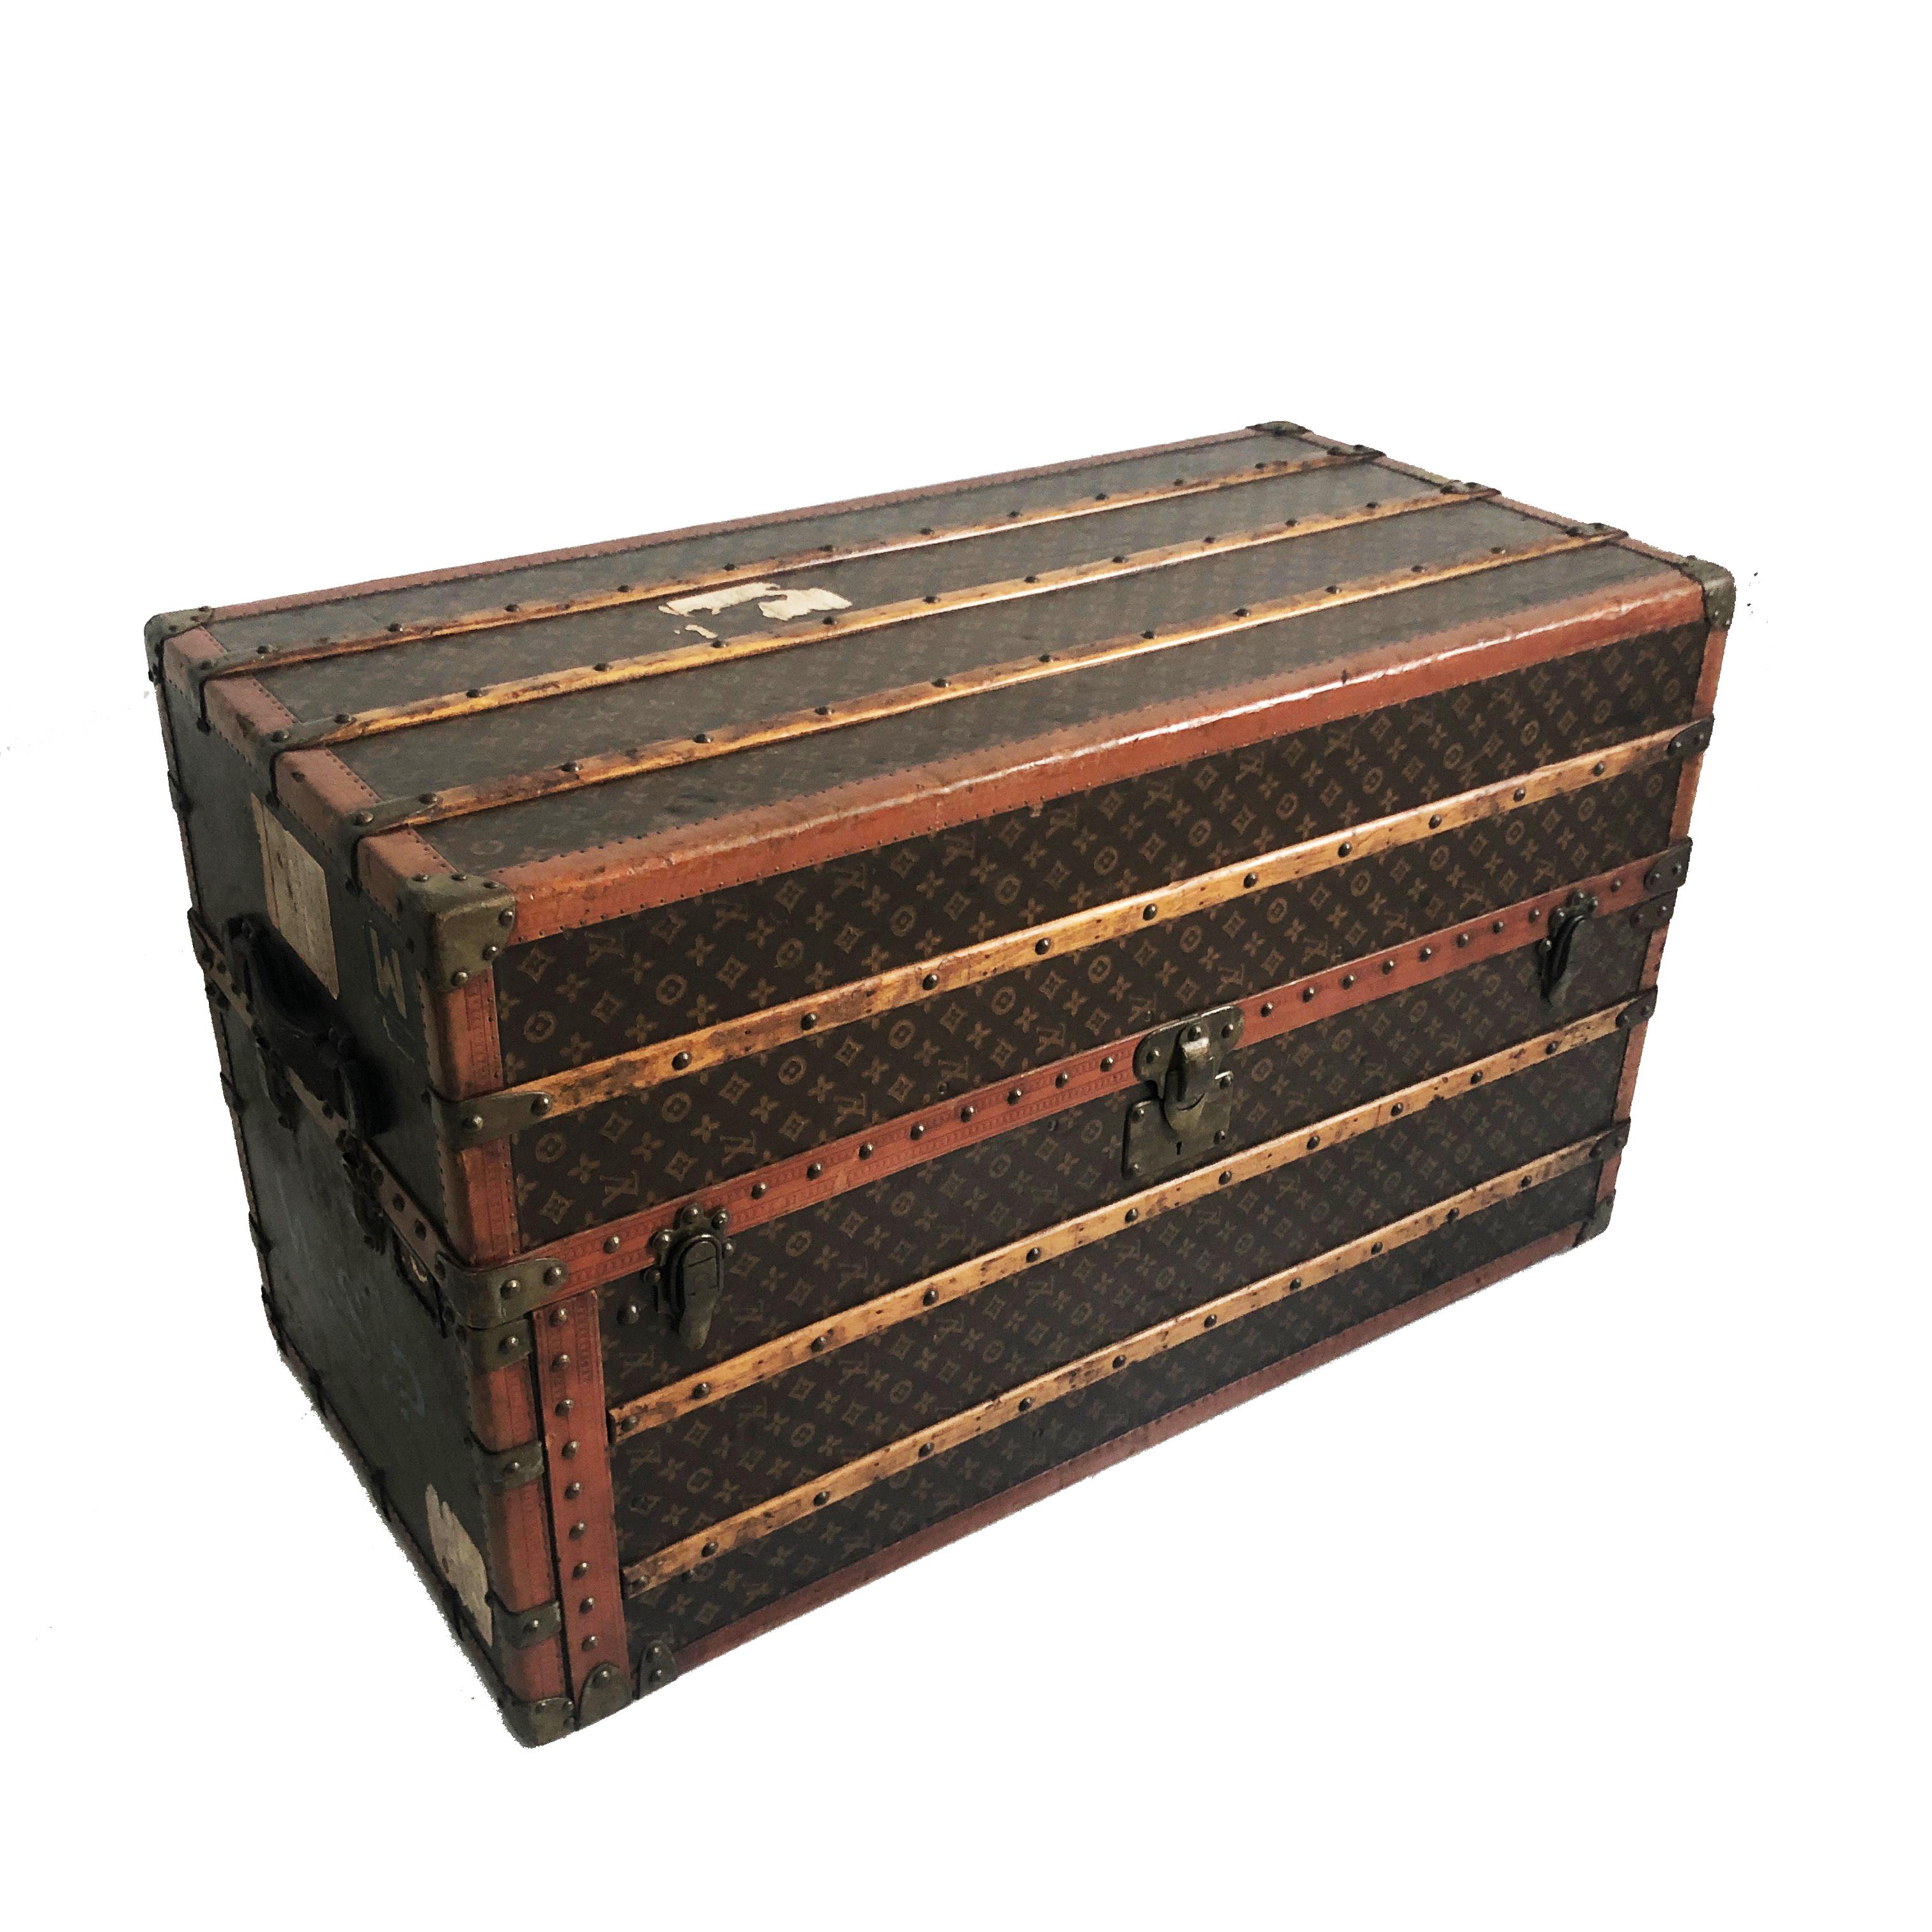 Here's an impressive Louis Vuitton Large Wardrobe Steamer Trunk Travel Case from the early 20th C.  Made from Vuitton's monogram canvas, the interior features 6 drawers, 8 full hangers, 3 pant hangers, 1 cloth screen and a removable velveteen lined